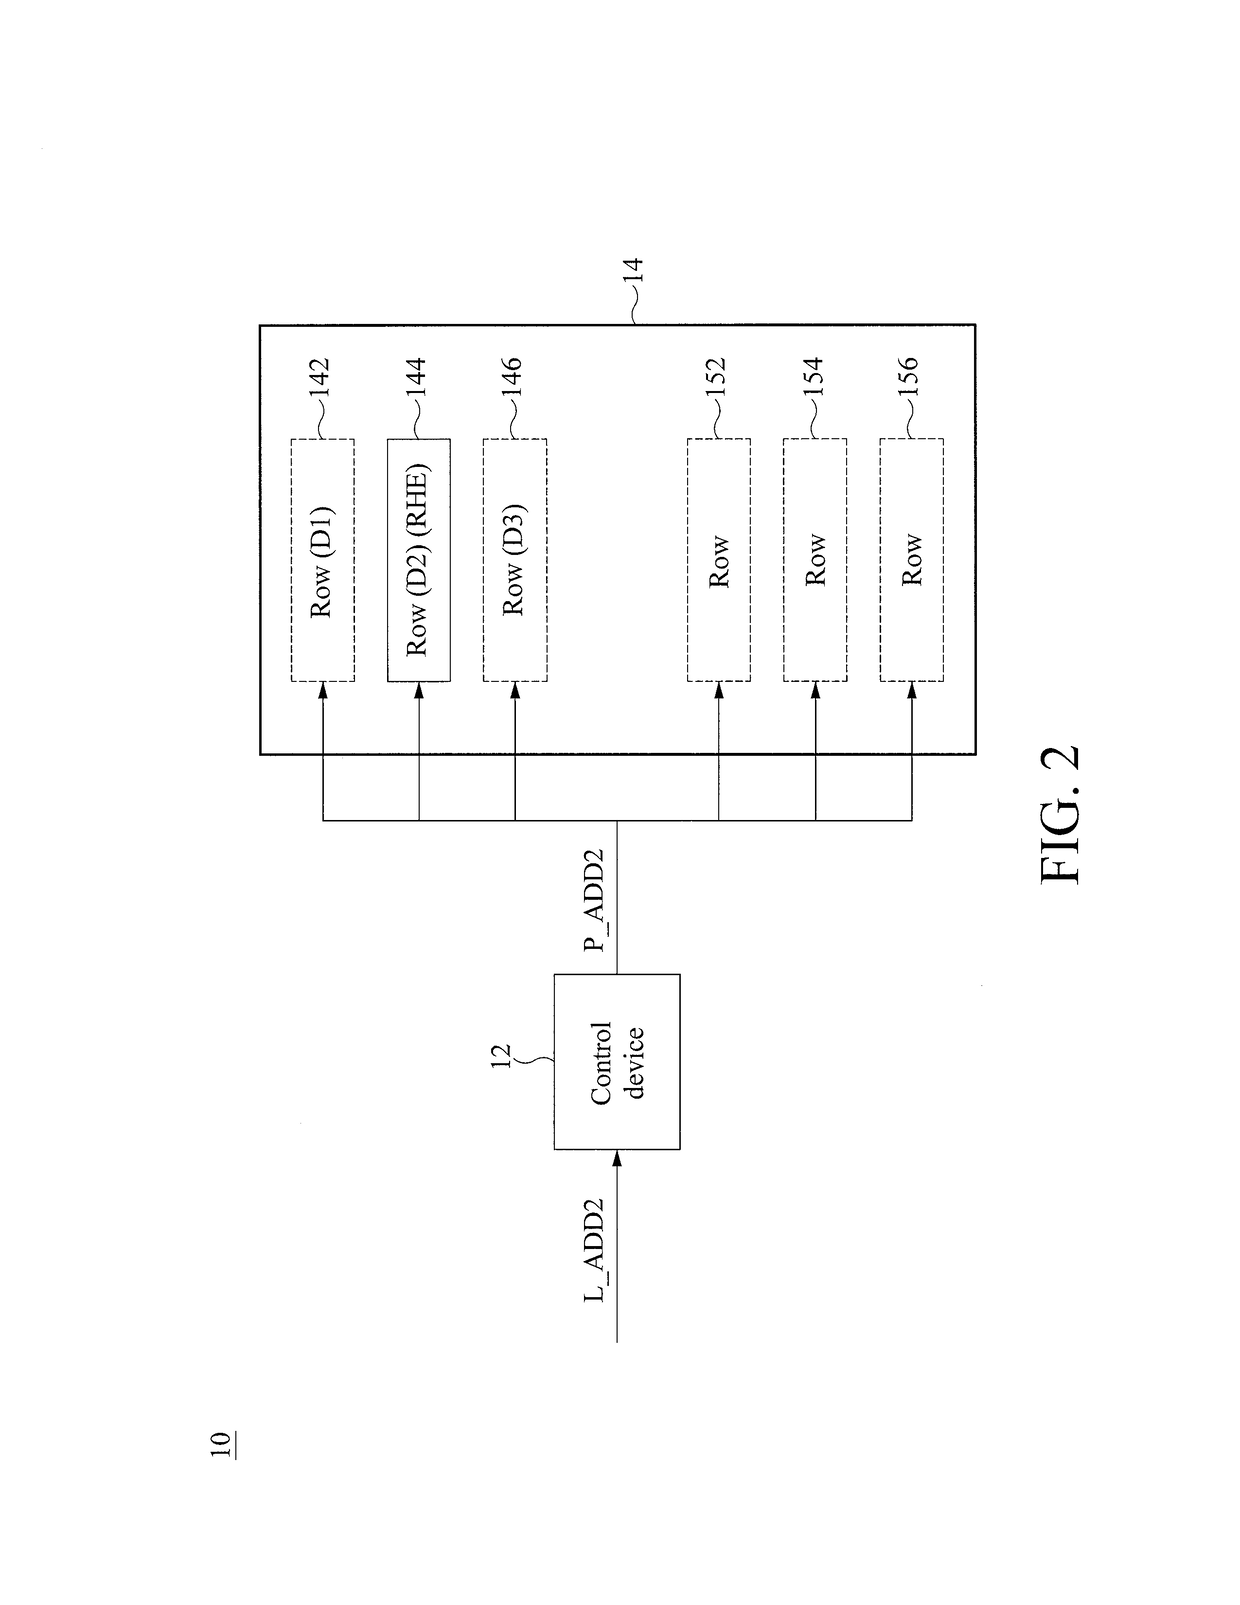 Dram and method for accessing a dram